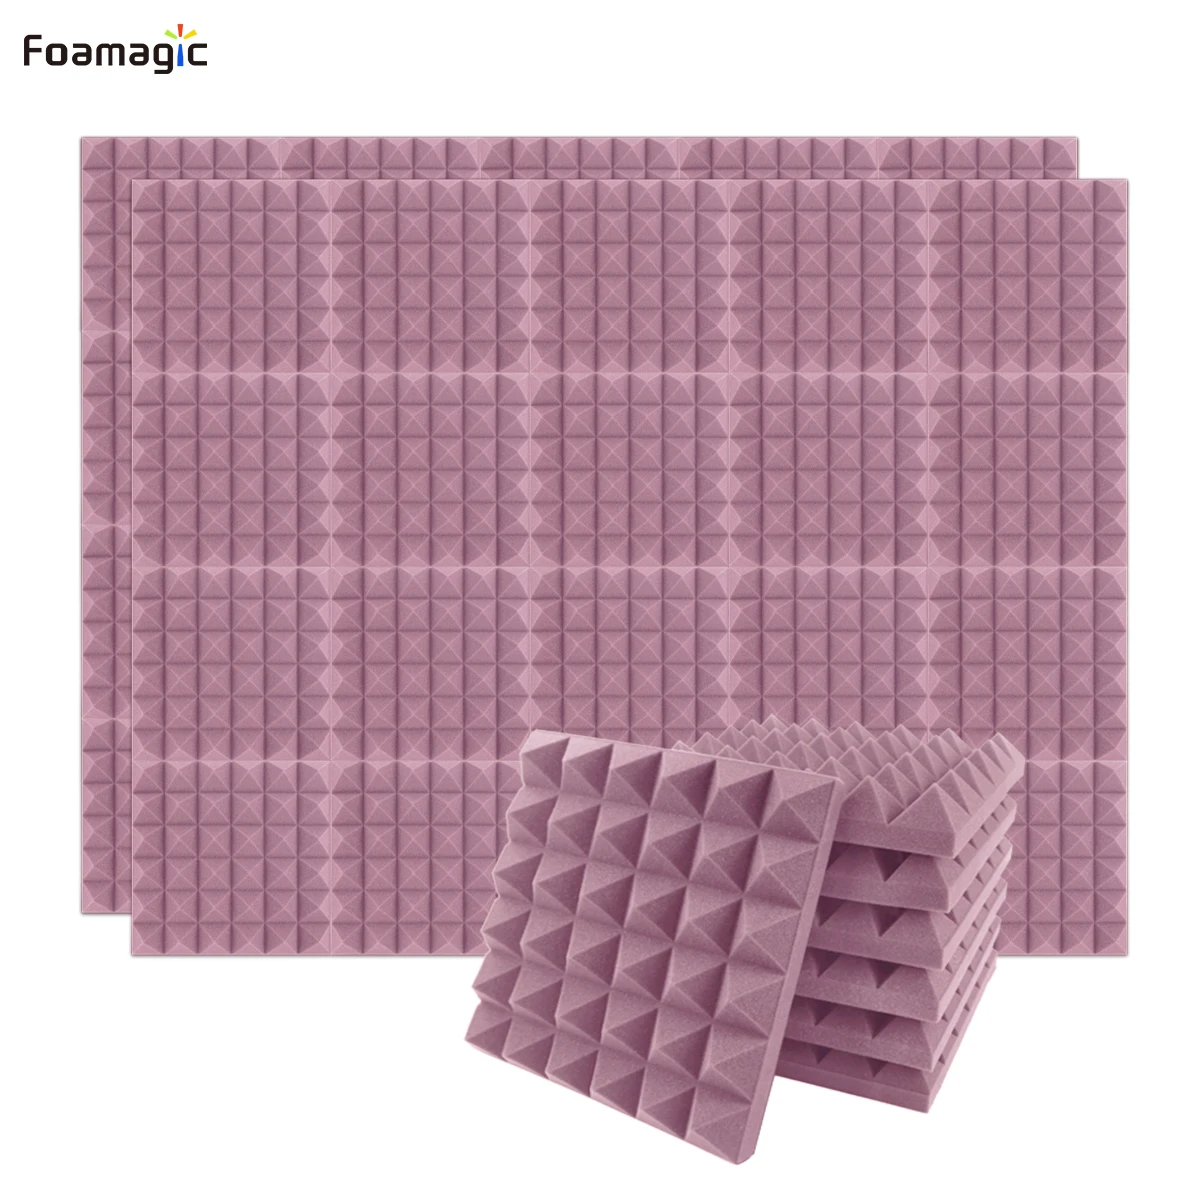 

High Density Fire Retardant Sound Proof Foam Panels for Walls and Ceiling 12 Pack Acoustic Foam Panels, 2" X 12" X 12"